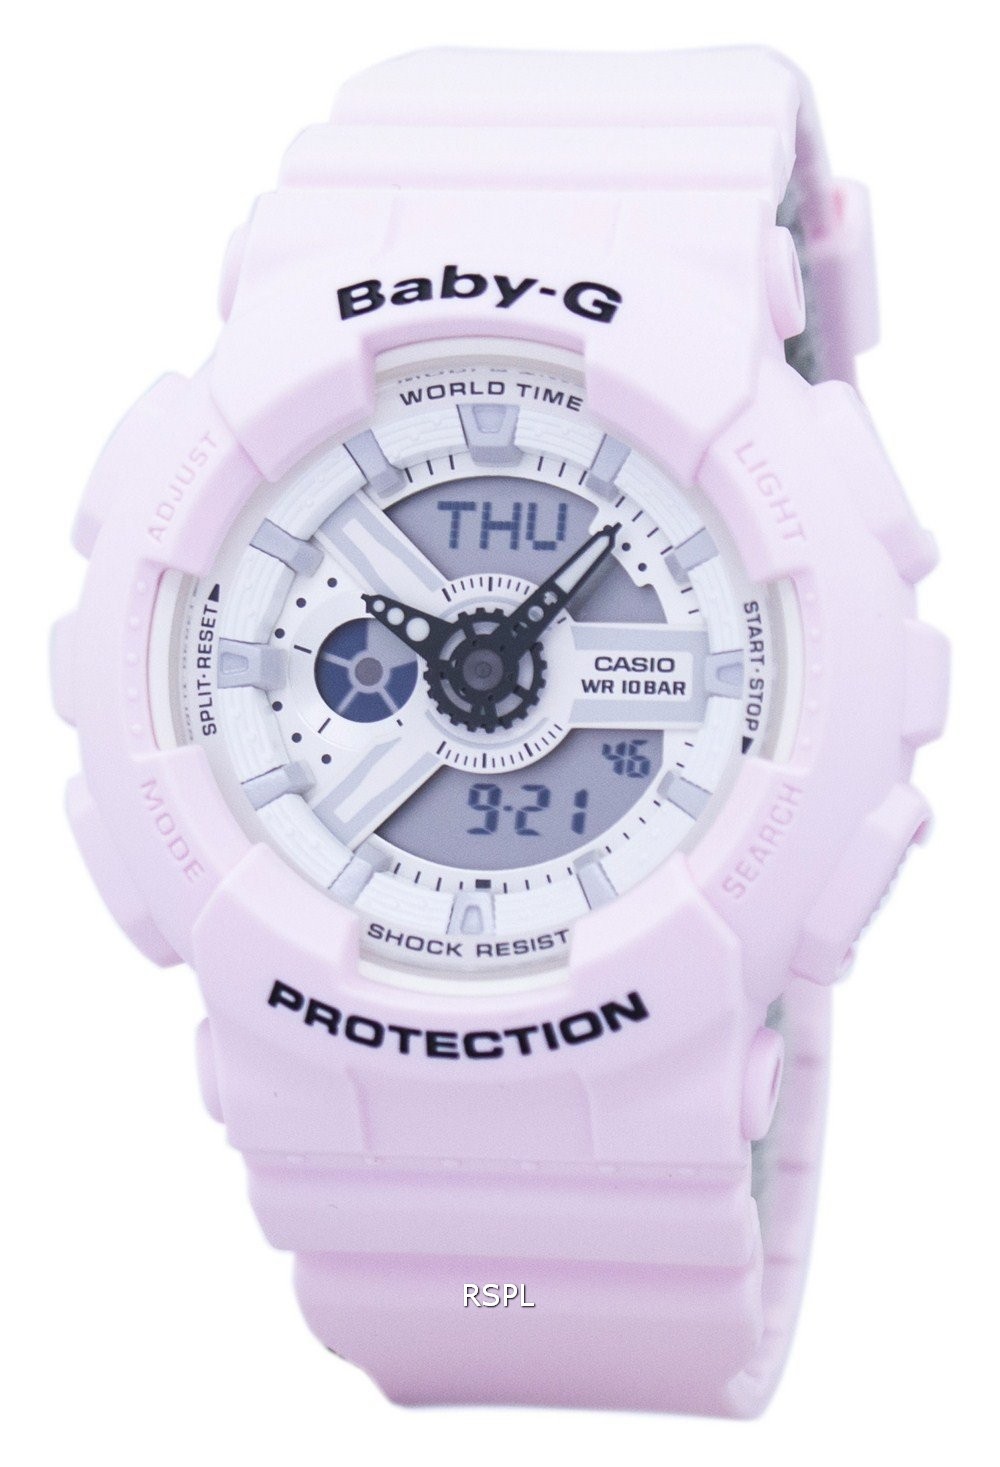 Casio Baby-G Shock Resistant World Time Analog Digital BA-110BE-4A